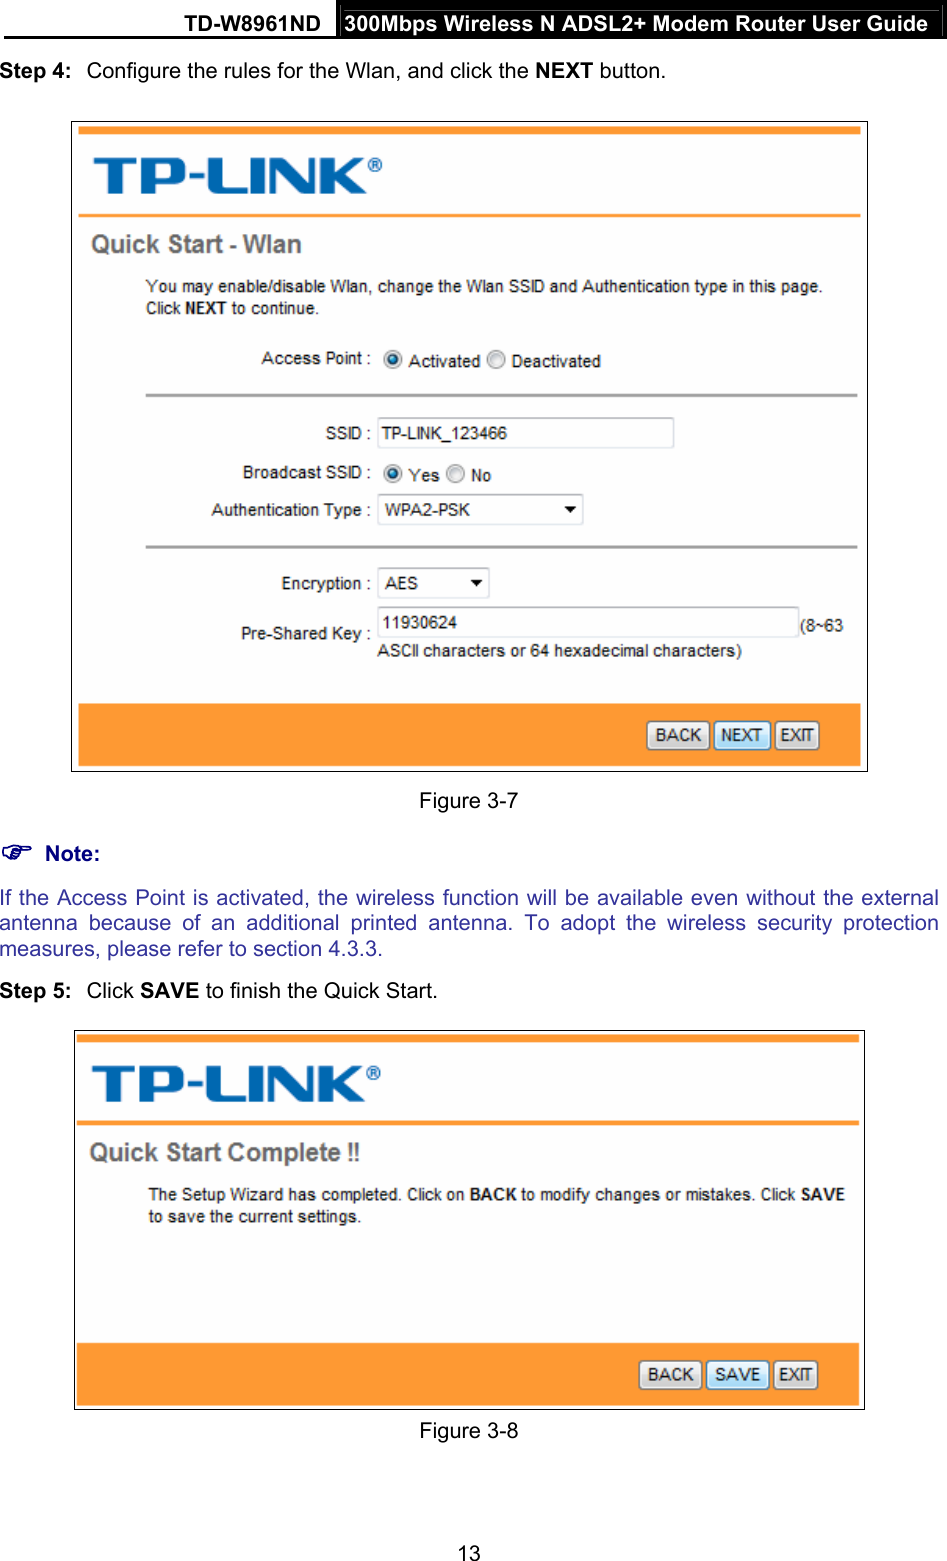 TD-W8961ND  300Mbps Wireless N ADSL2+ Modem Router User Guide  13Step 4:  Configure the rules for the Wlan, and click the NEXT button.  Figure 3-7  Note: If the Access Point is activated, the wireless function will be available even without the external antenna because of an additional printed antenna. To adopt the wireless security protection measures, please refer to section 4.3.3. Step 5:  Click SAVE to finish the Quick Start.  Figure 3-8 